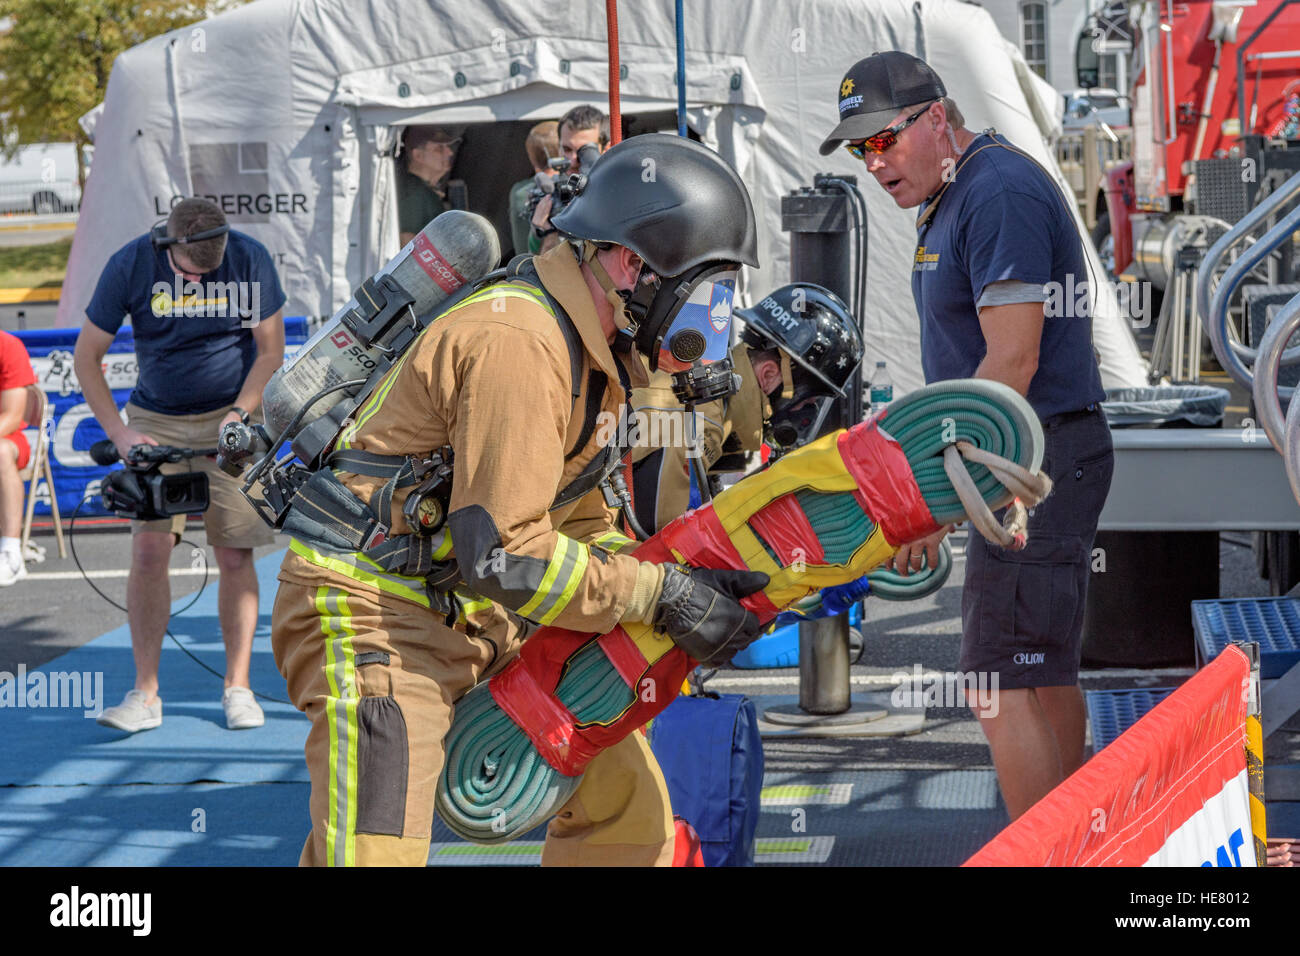 Firefighters in full turn out gear waiting to compete. Stock Photo